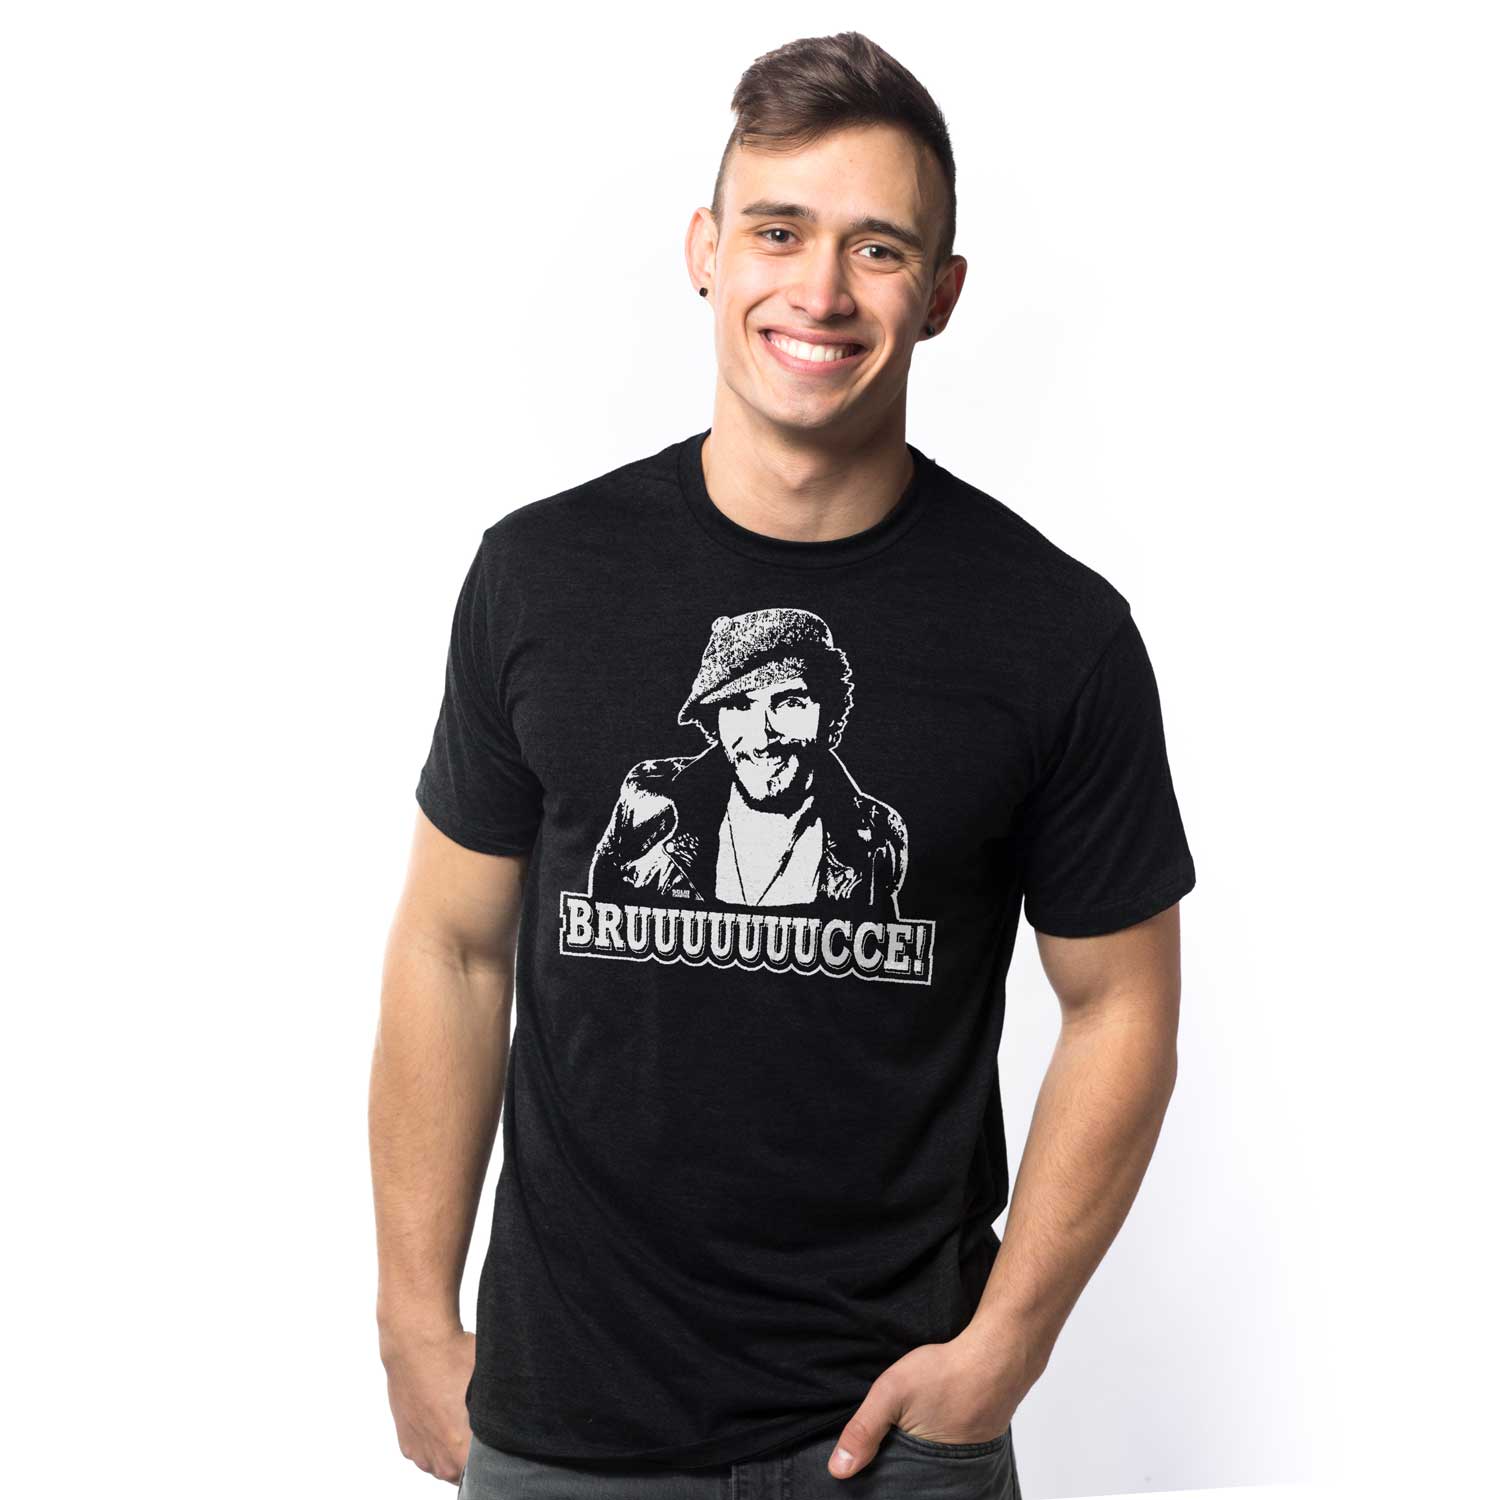 Men's Bruuuce Vintage Music T-Shirt | Retro Springsteen Fan Graphic Tee | Solid Threads